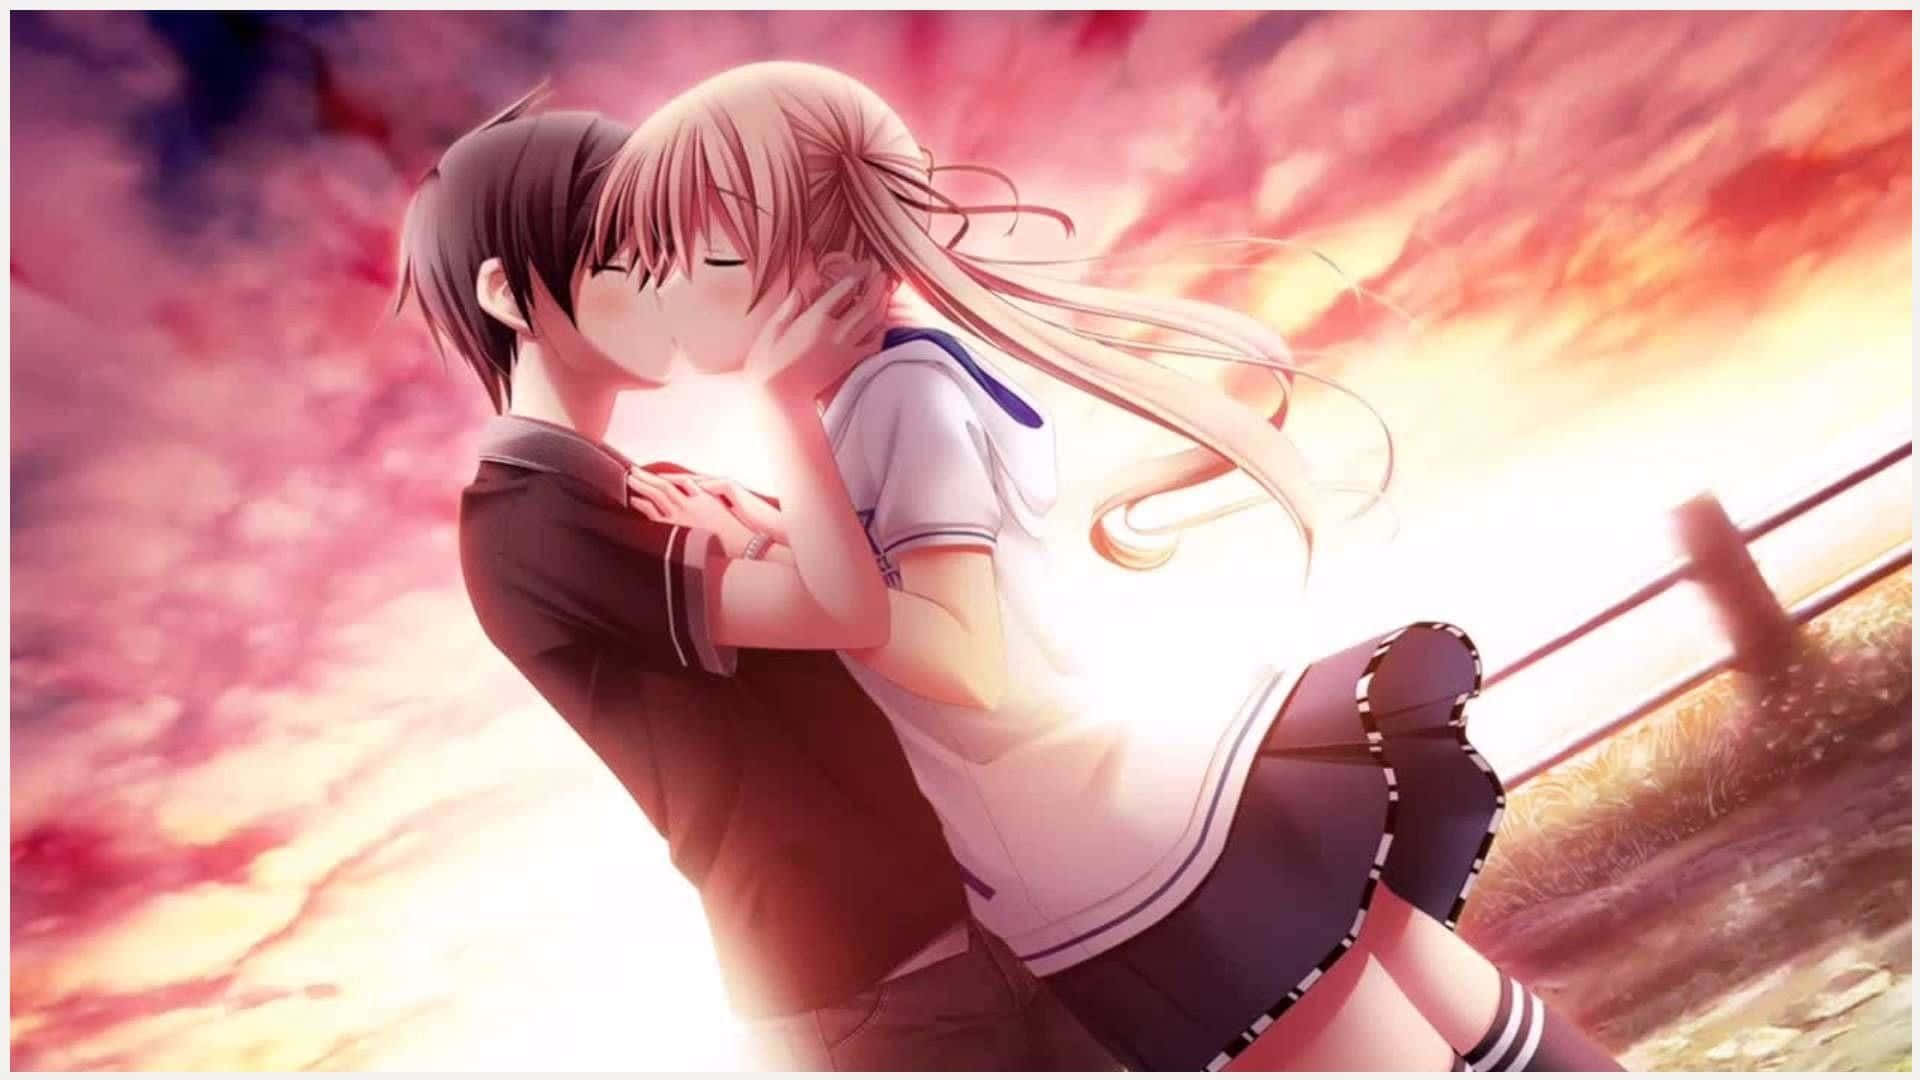 Couple Kissing Anime With Sunset Sky Picture